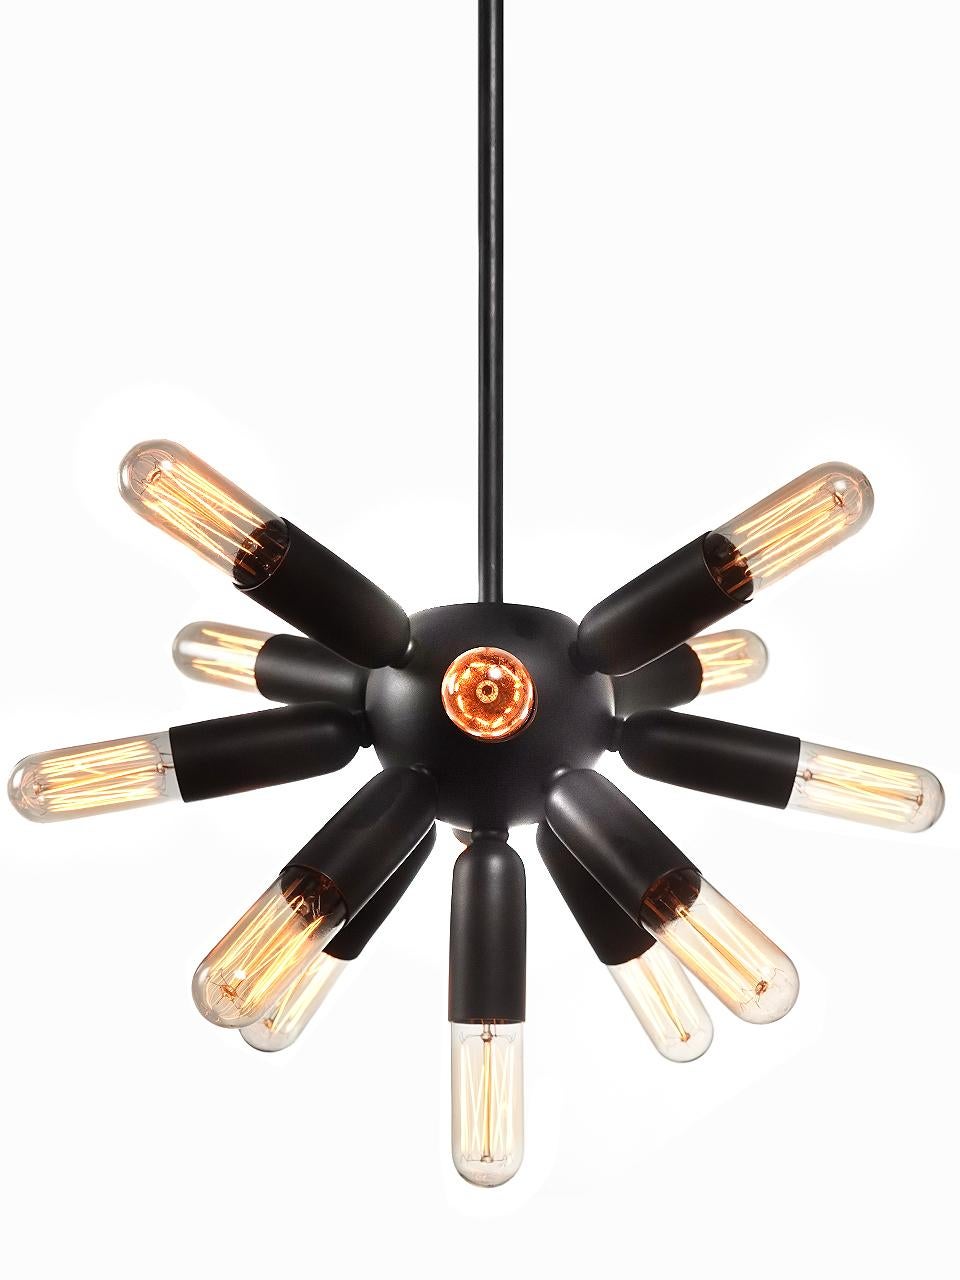 This classic Spudnick lamp is has a nice compact size and has a 14 inch diameter with the bulbs. With 13 bulbs it creates a dramatic starburst effect. the metal is finished in dark brass and is a nice contrast to the bright bulbs.
We only created a